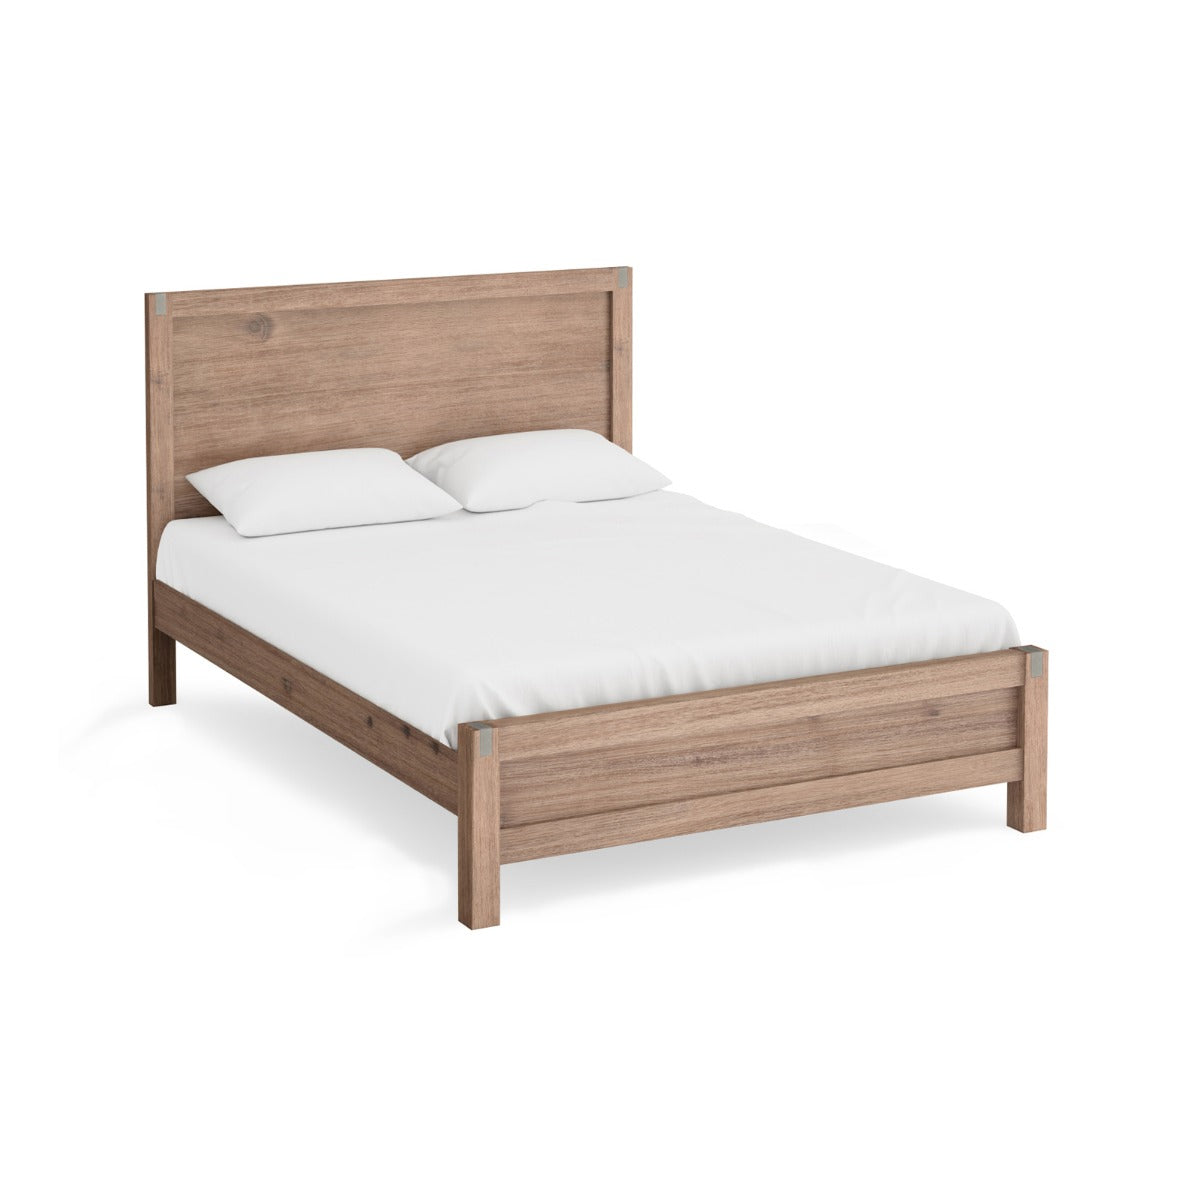 Nowra King Single Bed